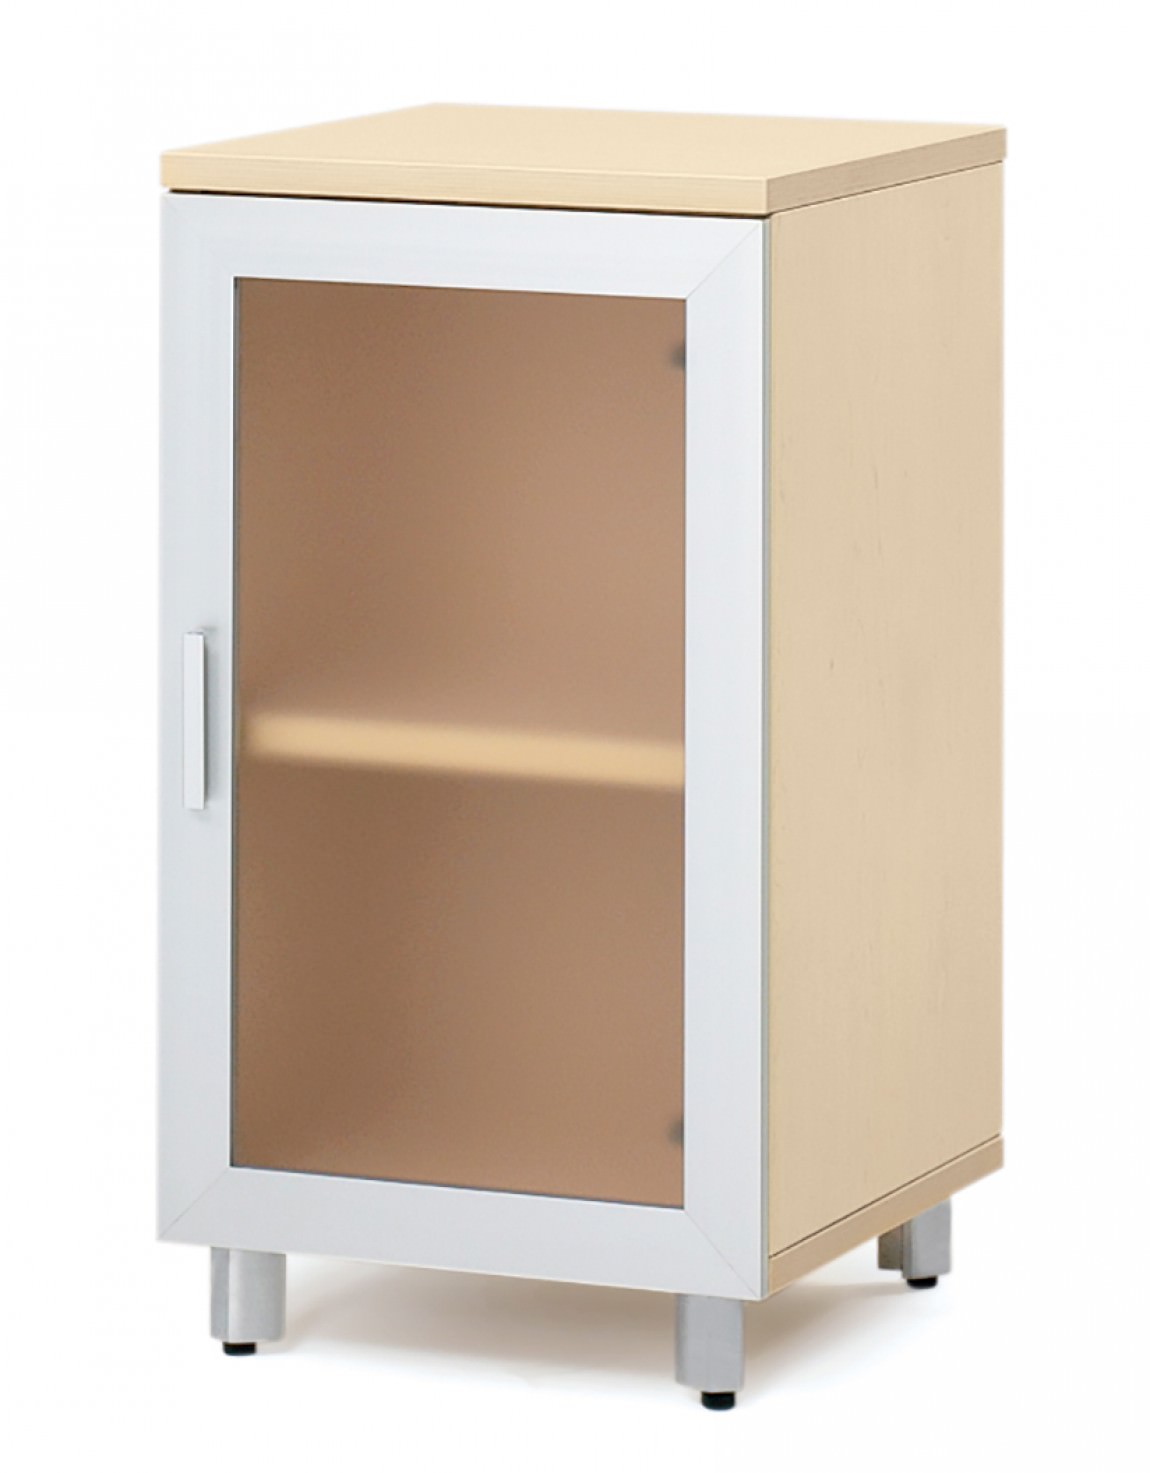 Small Storage Cabinet with Glass Door - Hard Rock Maple - Concept 3 by Groupe Lacasse